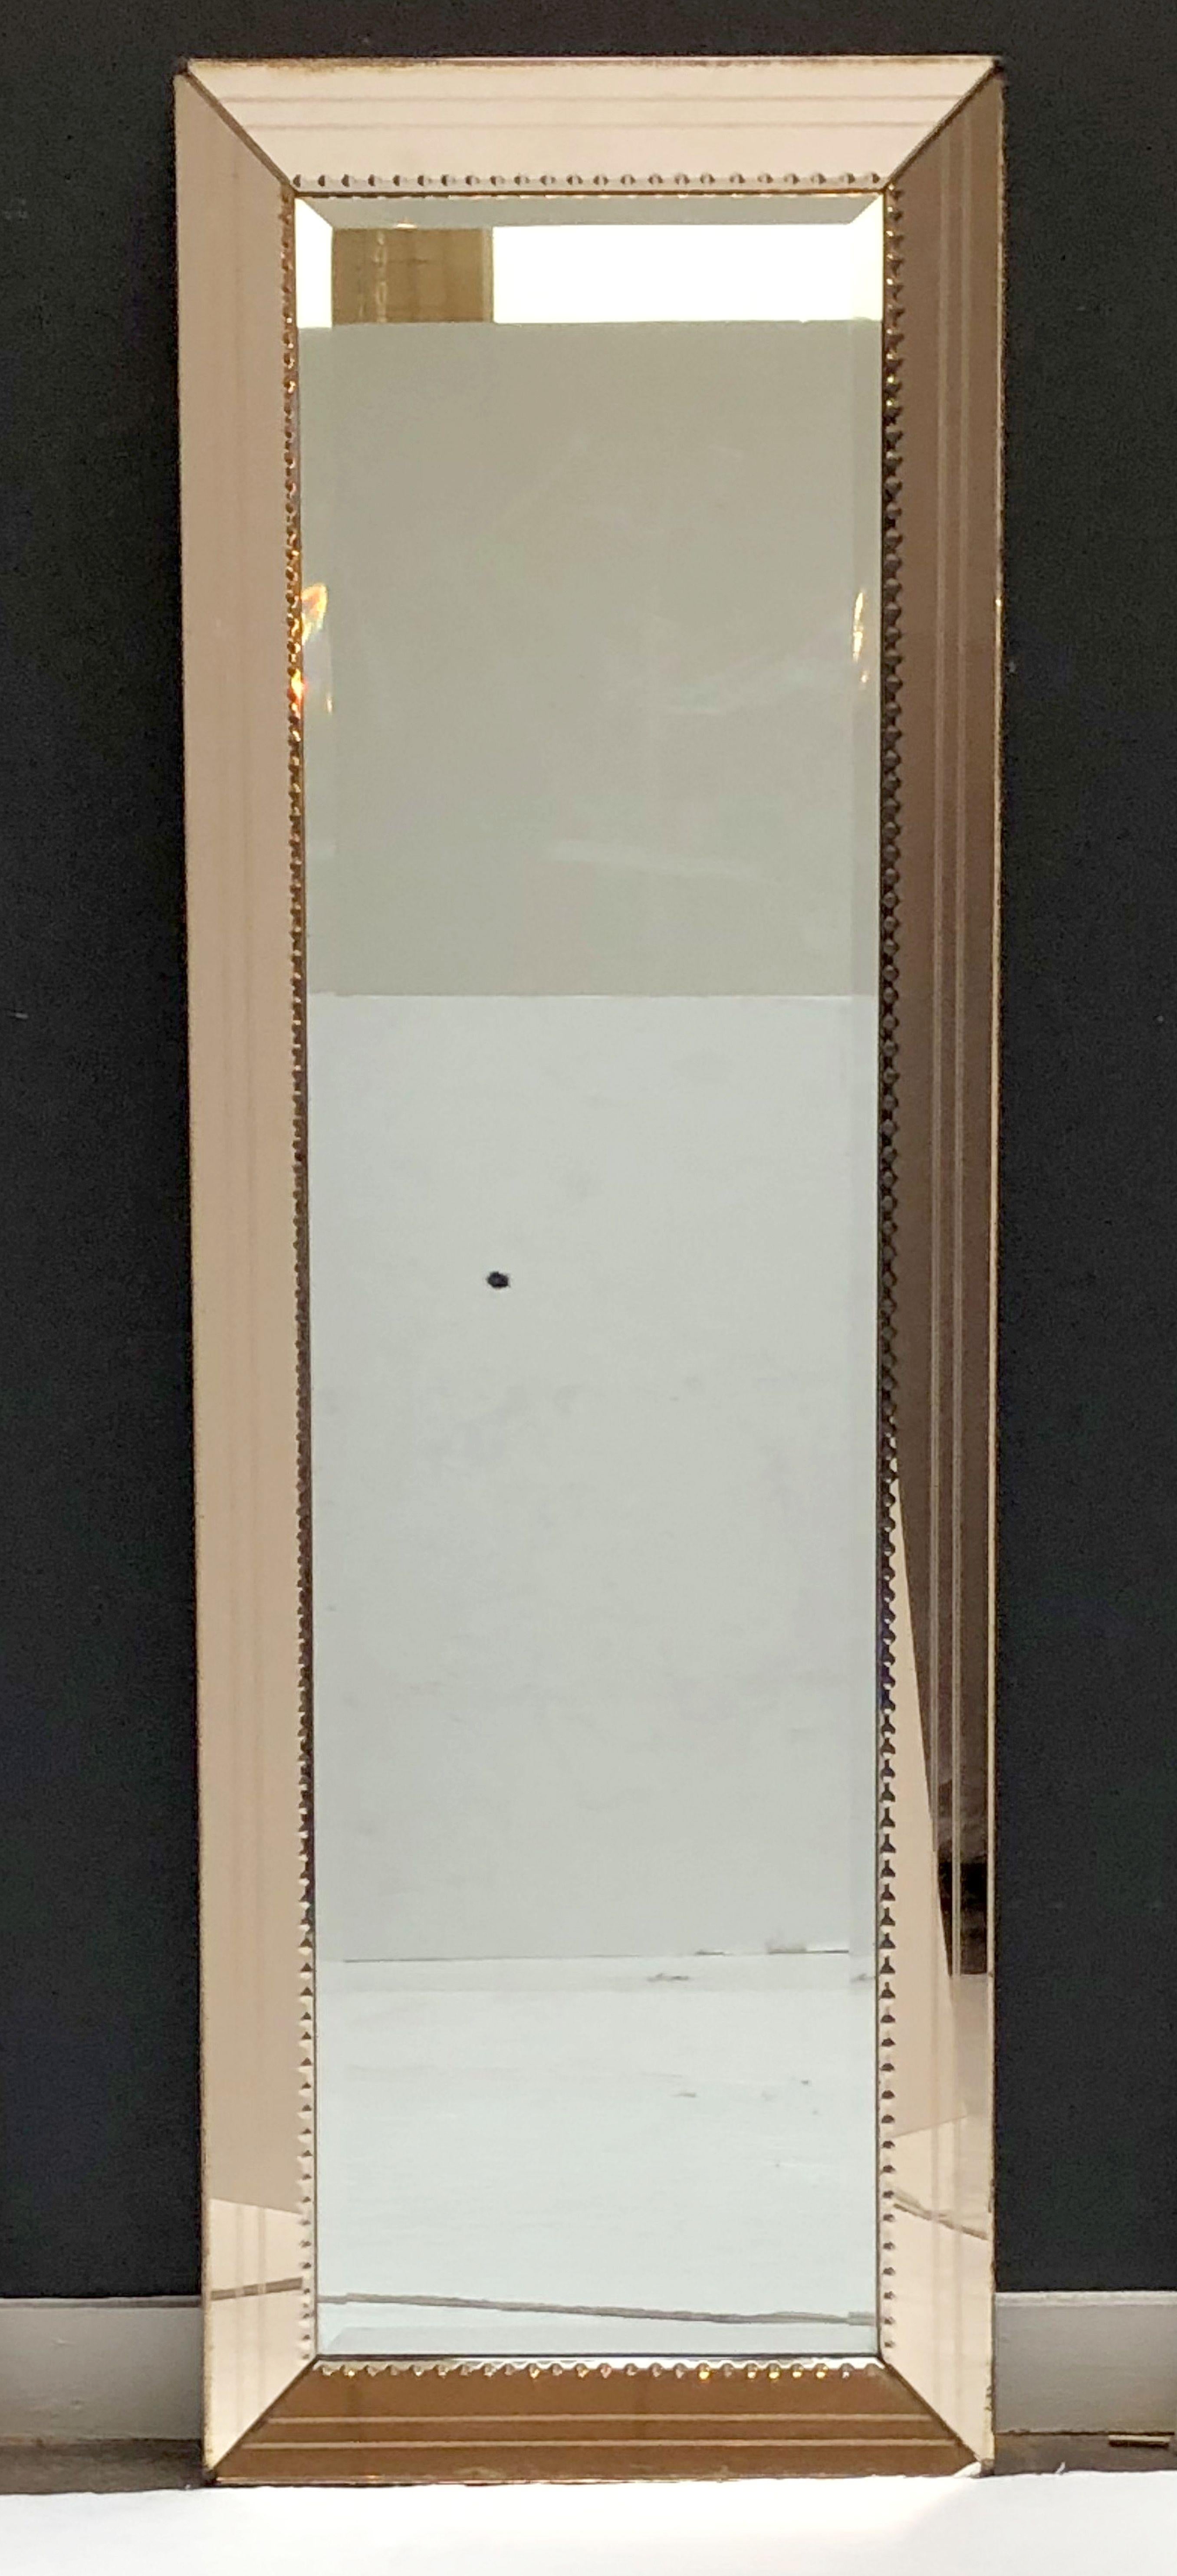 Art Deco Mirror with Beveled Frame of Copper-Colored Glass (H 58 3/4 x W 19 3/4) 12